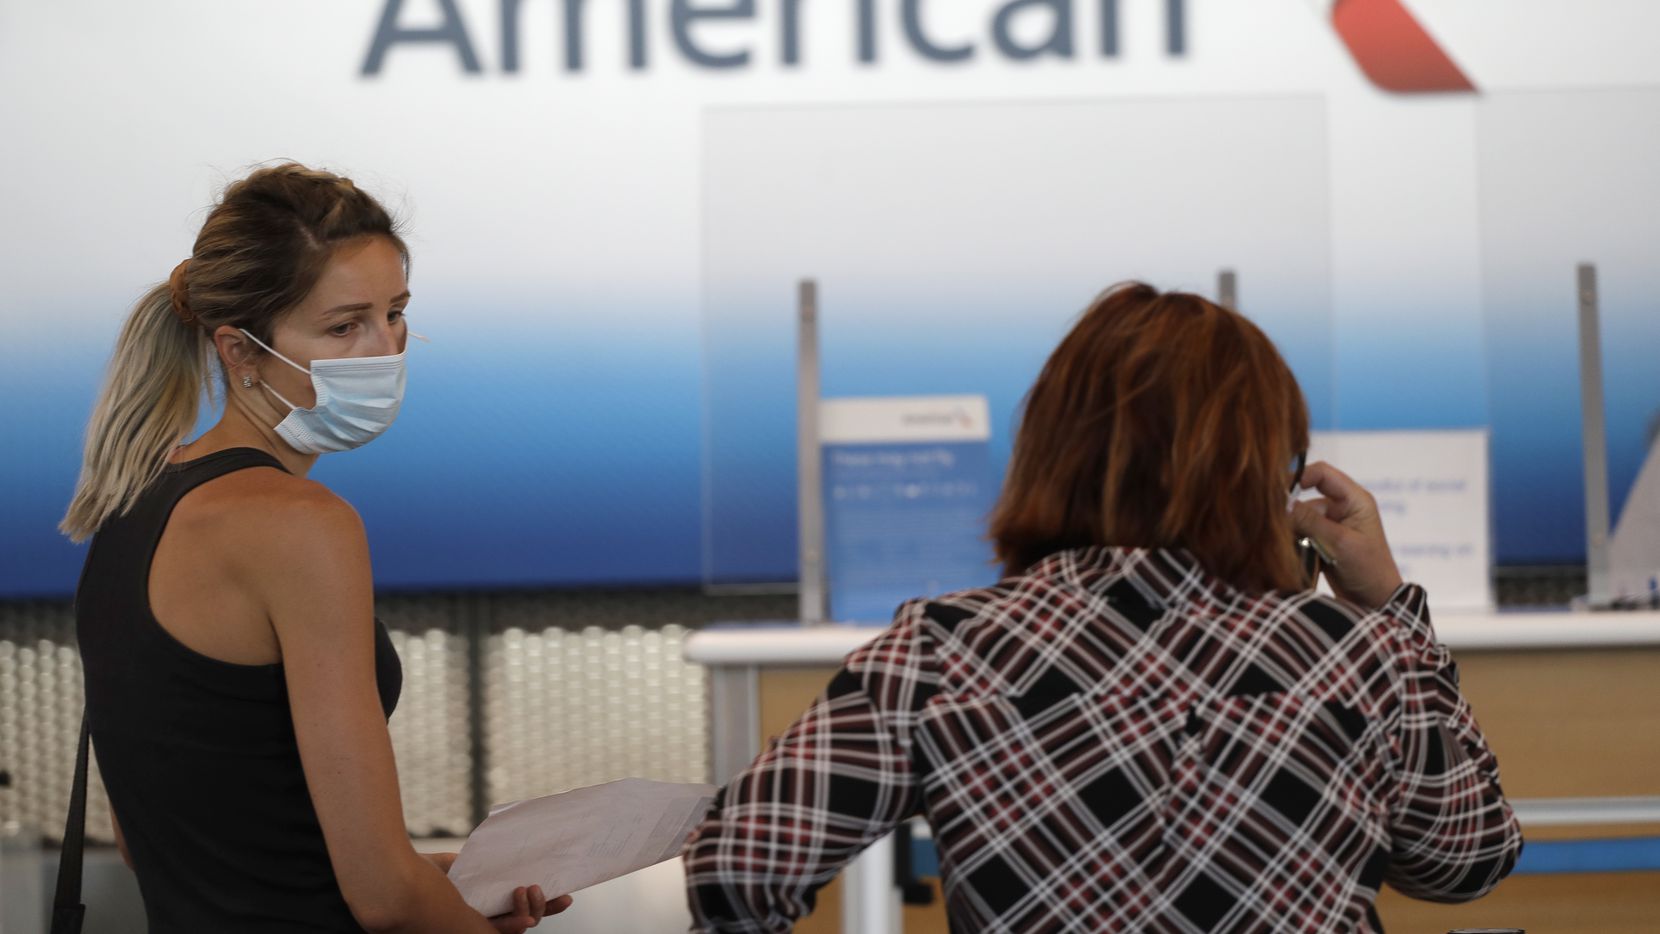 Travelers wear masks as they wait at the American Airlines ticket counter at O'Hare...